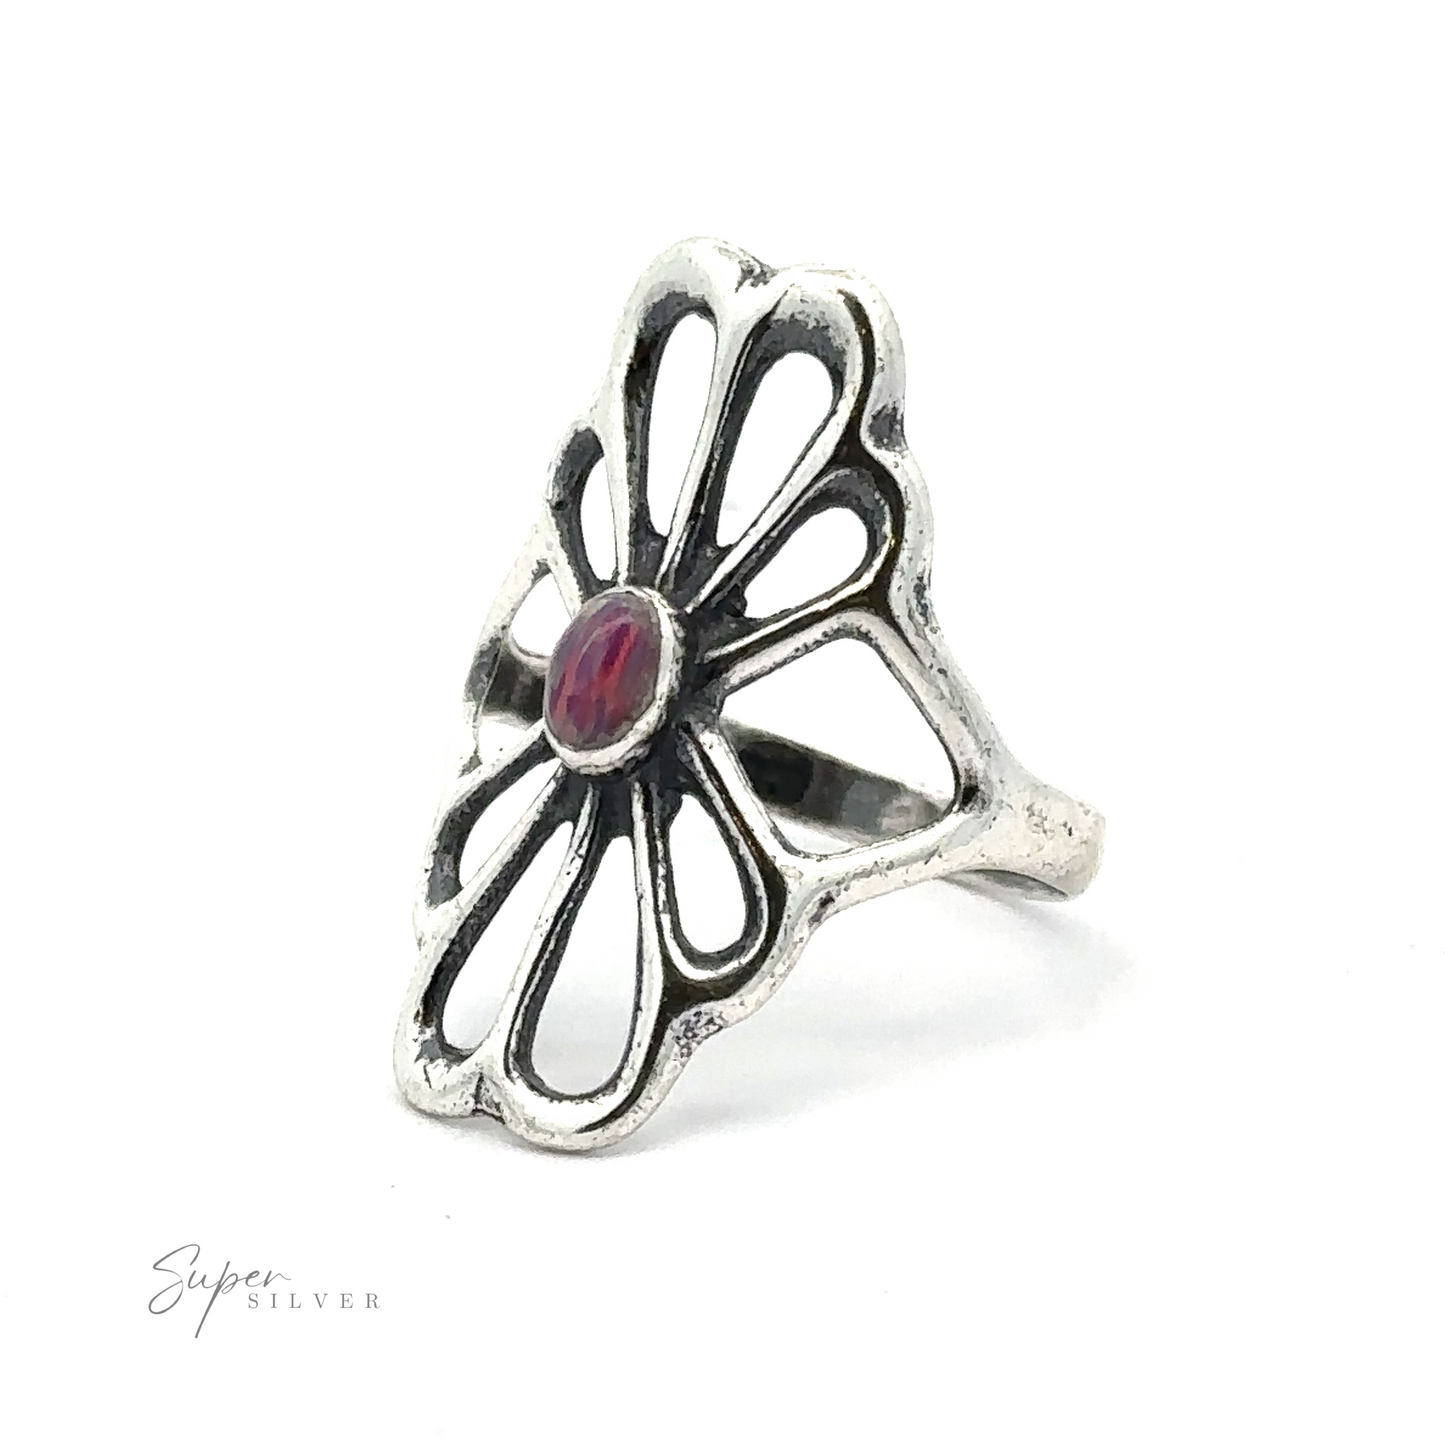 
                  
                    American Made Flower Ring with an openwork, sterling silver flower design featuring a central red gemstone. Handcrafted in America, this exquisite piece stands out with its intricate detailing. "Super Silver" text is visible at the bottom left corner.
                  
                